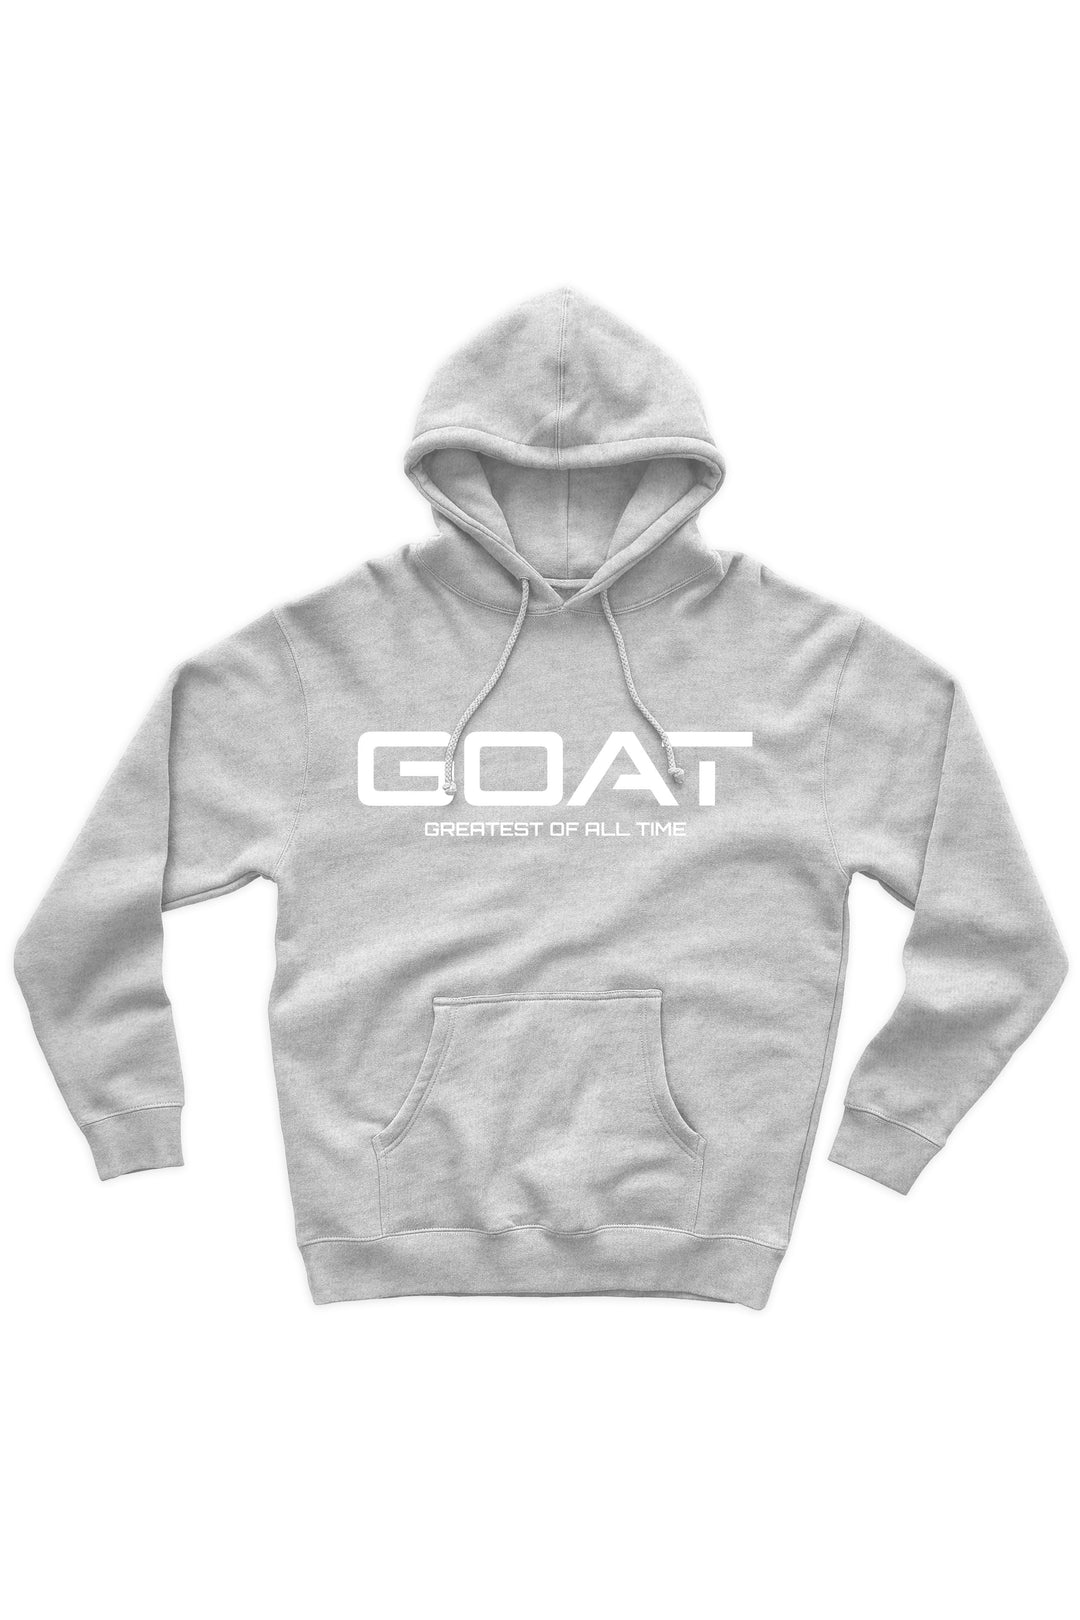 Greatest Of All Time Hoodie (White Logo) - Zamage